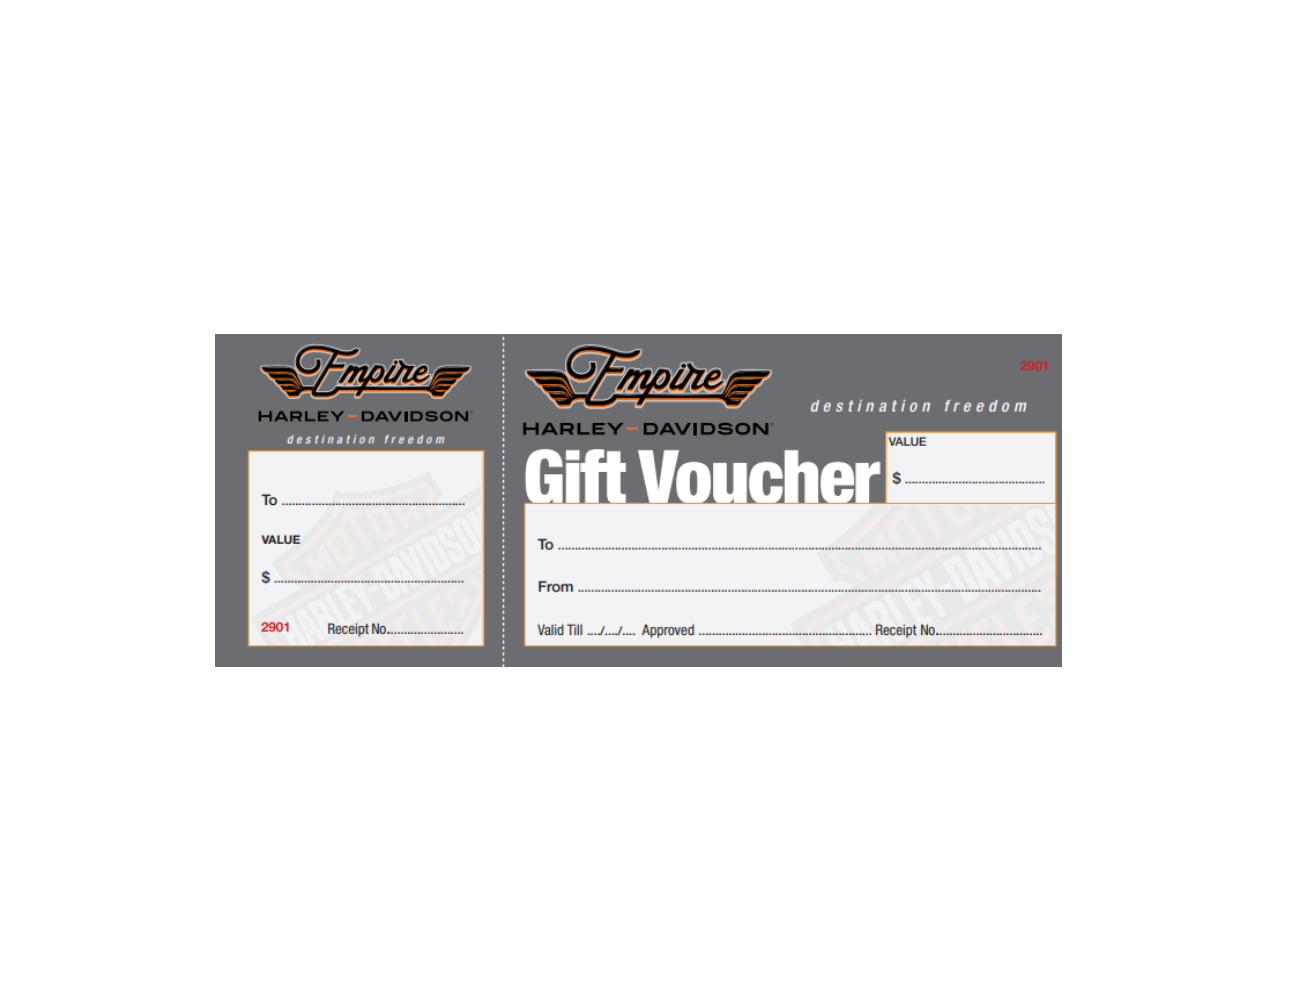 Electronic Gift Voucher - For Online Use ONLY